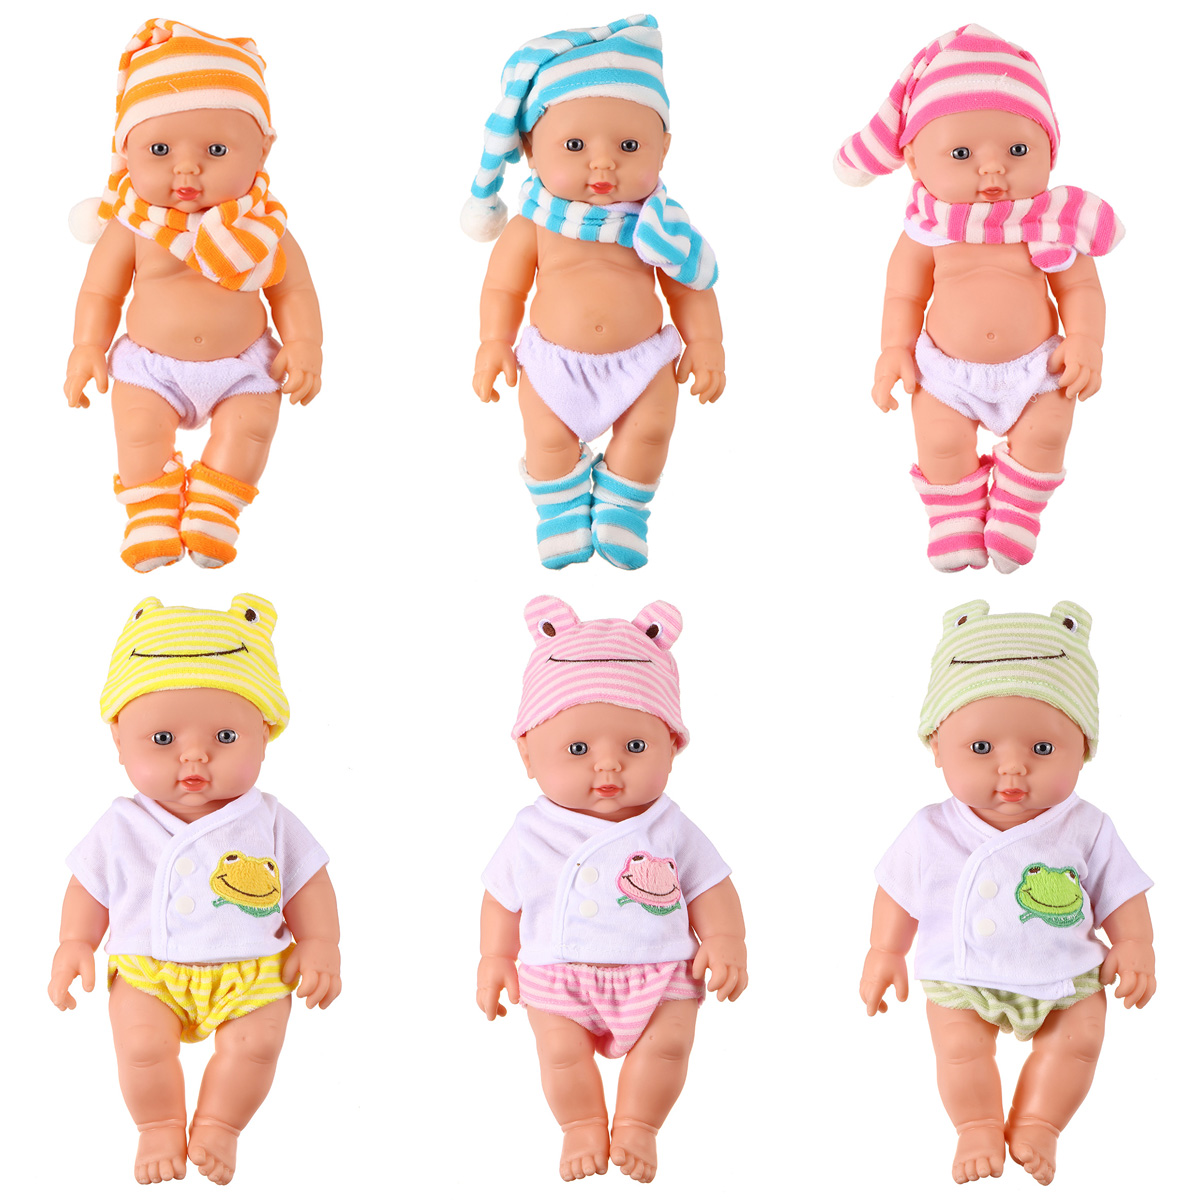 30CM-Height-Simulation-Soft-Silicone-Vinyl-Joint-Removable-Washable-Reborn-Baby-Doll-Toy-for-Kids-Bi-1812138-3